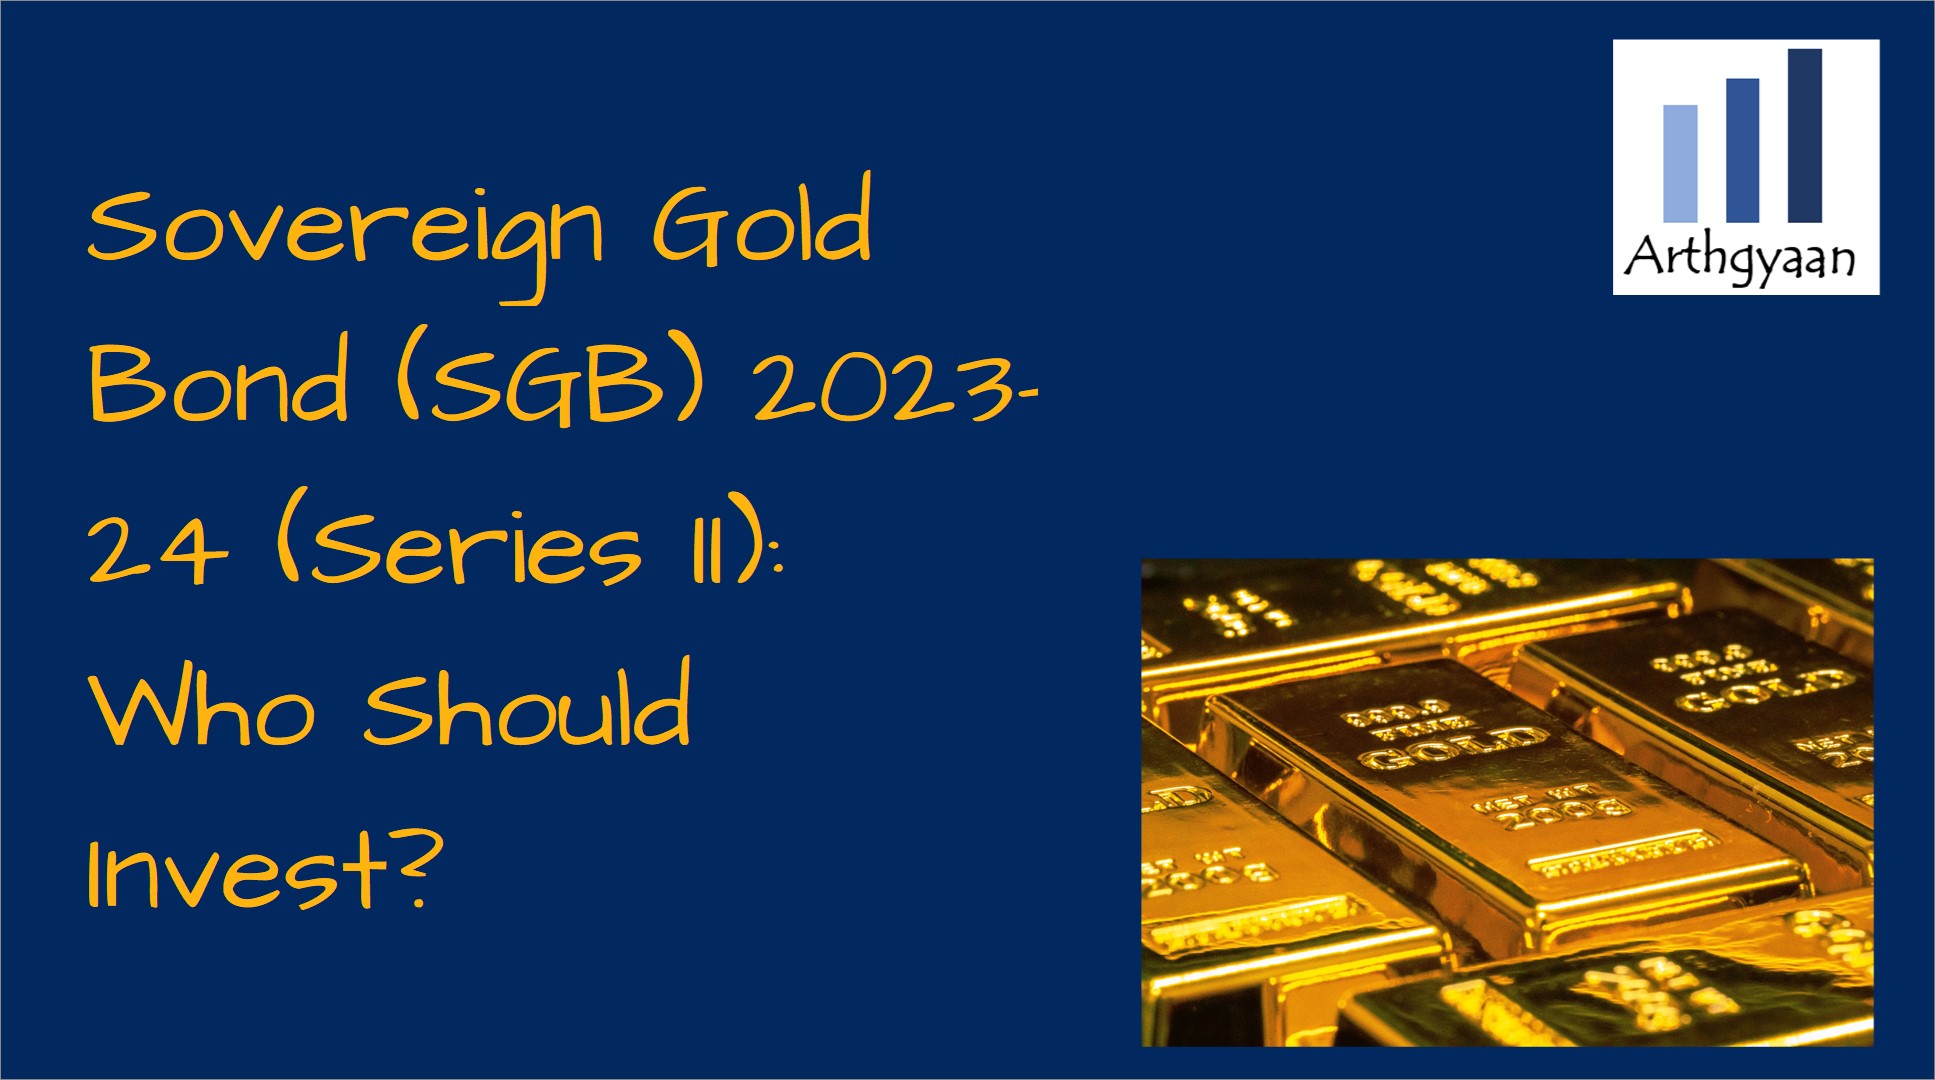 Sovereign Gold Bond (SGB) 2023-24 (Series II): Who Should Invest?